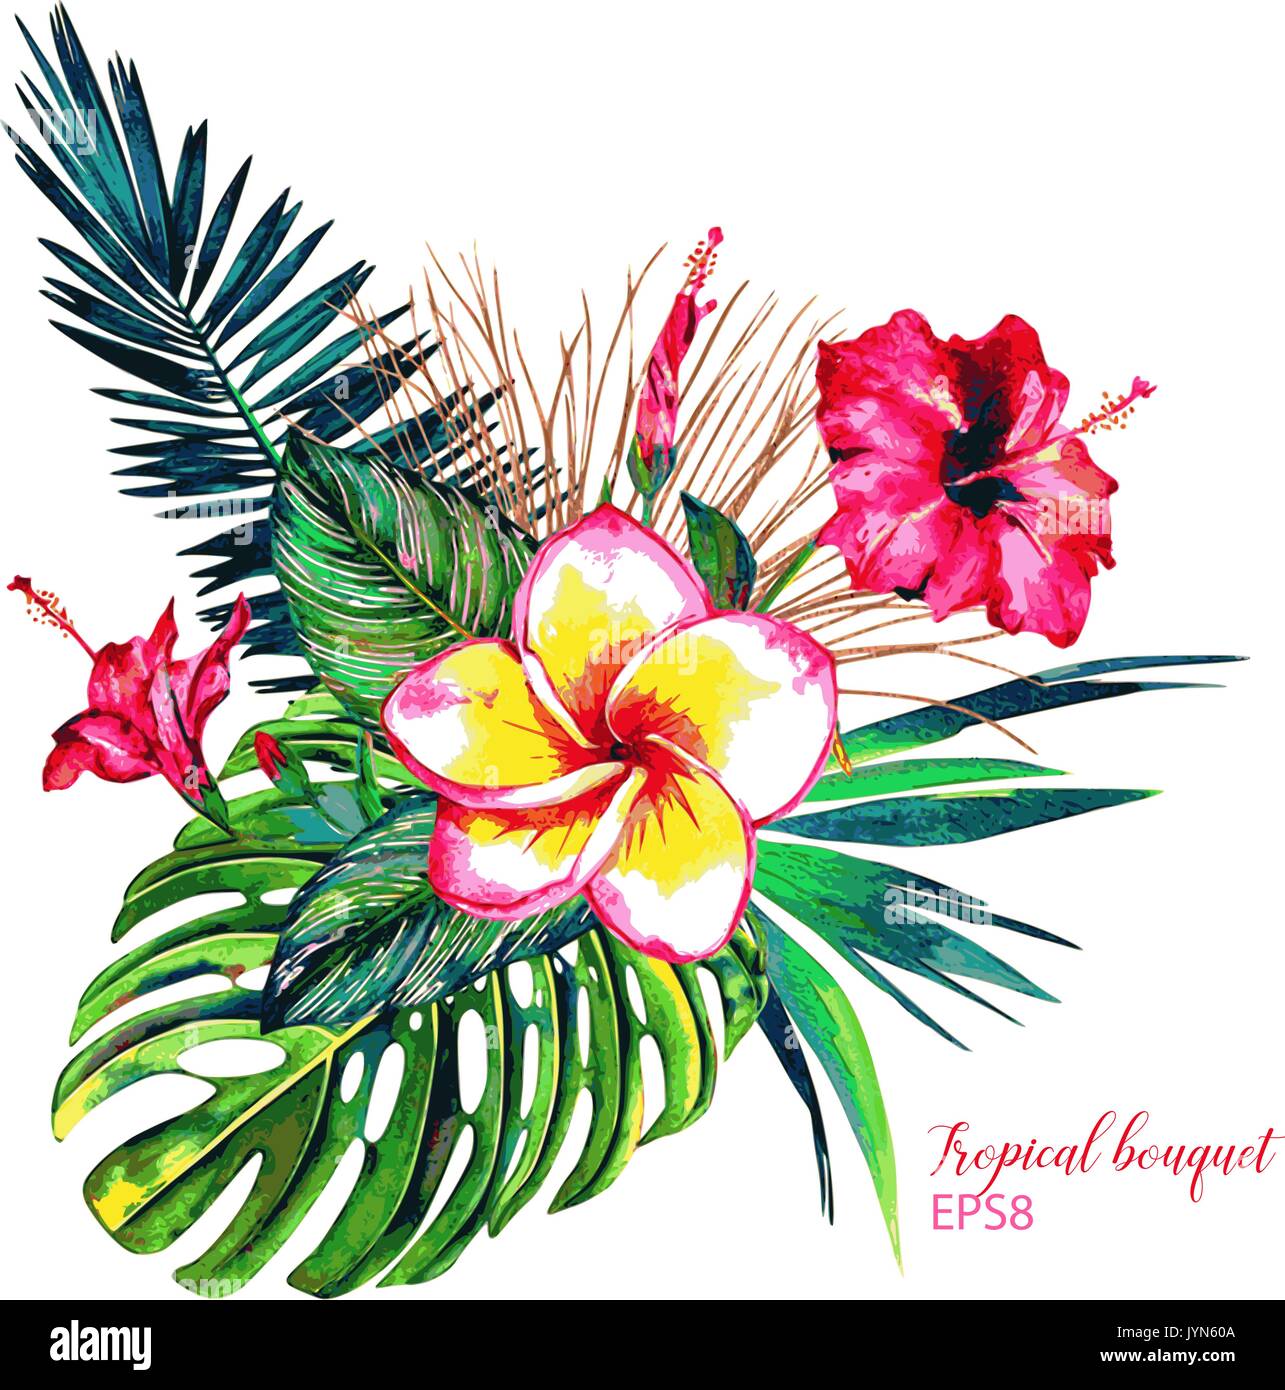 Tropical bouquet. Exotic flowers of hibiscus and plumeria, rain forest palm leaves, calathea and monstera. Handmade vector floral watercolor. Stock Vector